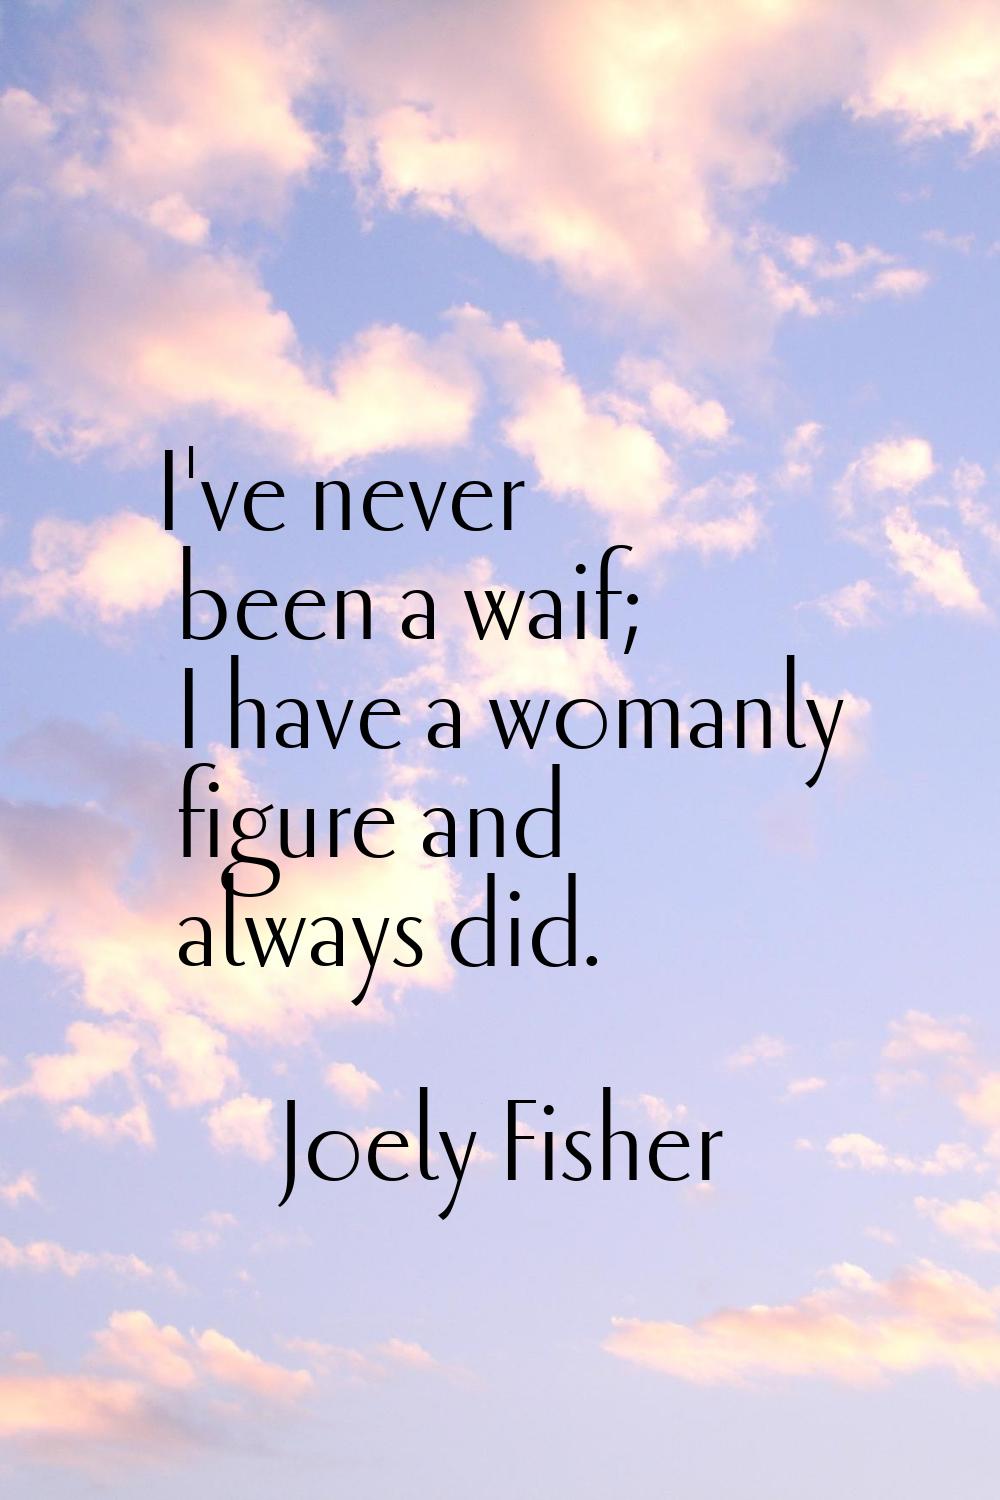 I've never been a waif; I have a womanly figure and always did.